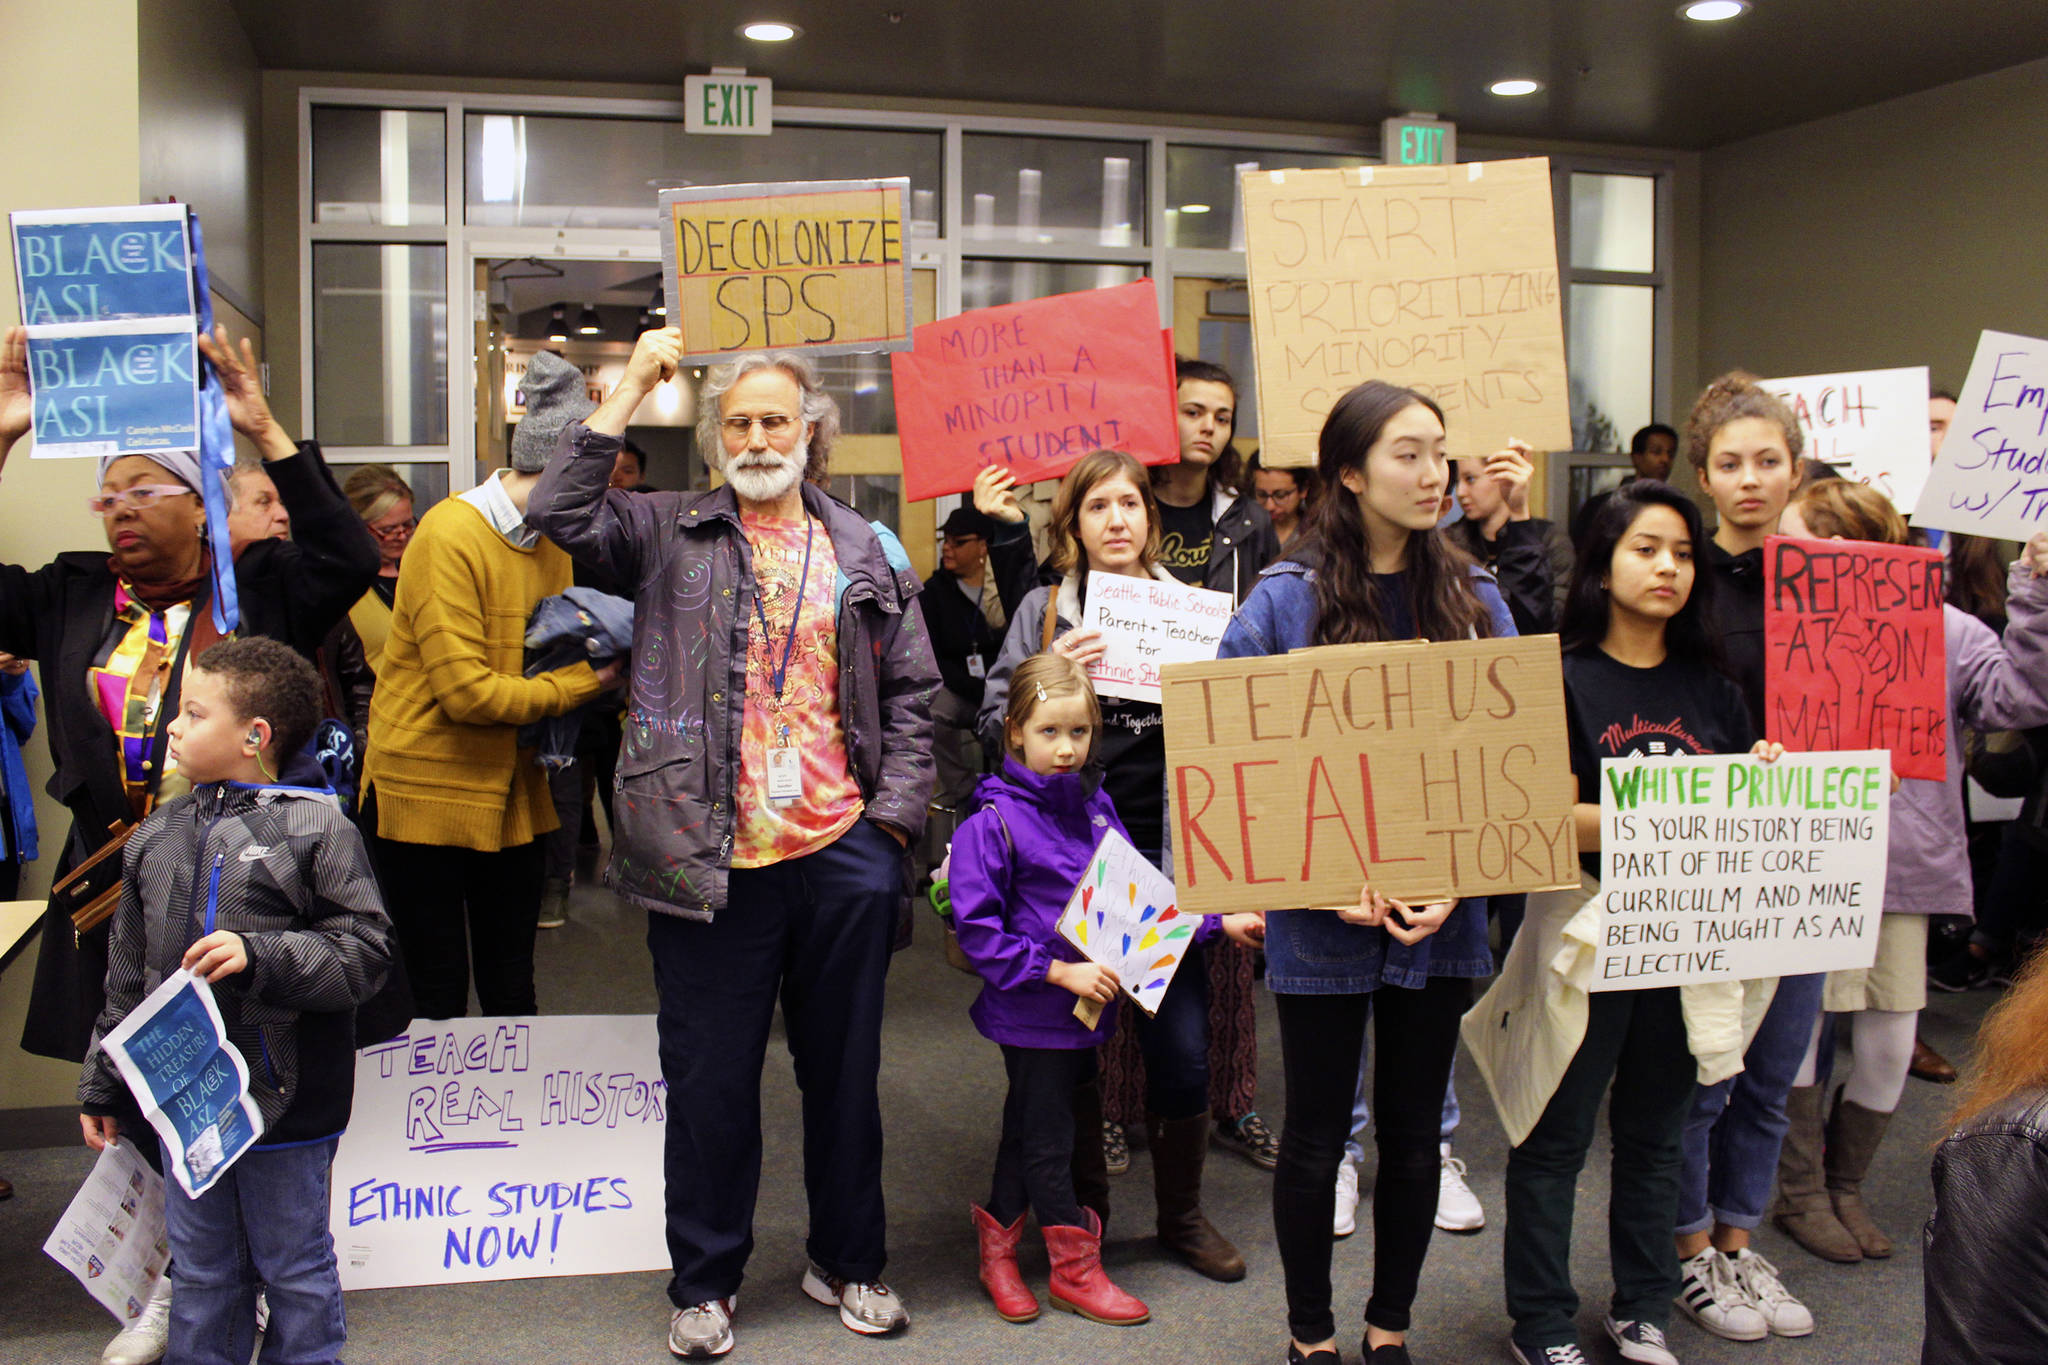 Students, parents, teachers show up at the school board meeting to support an equitable curriculum. Photo by Sara Bernard